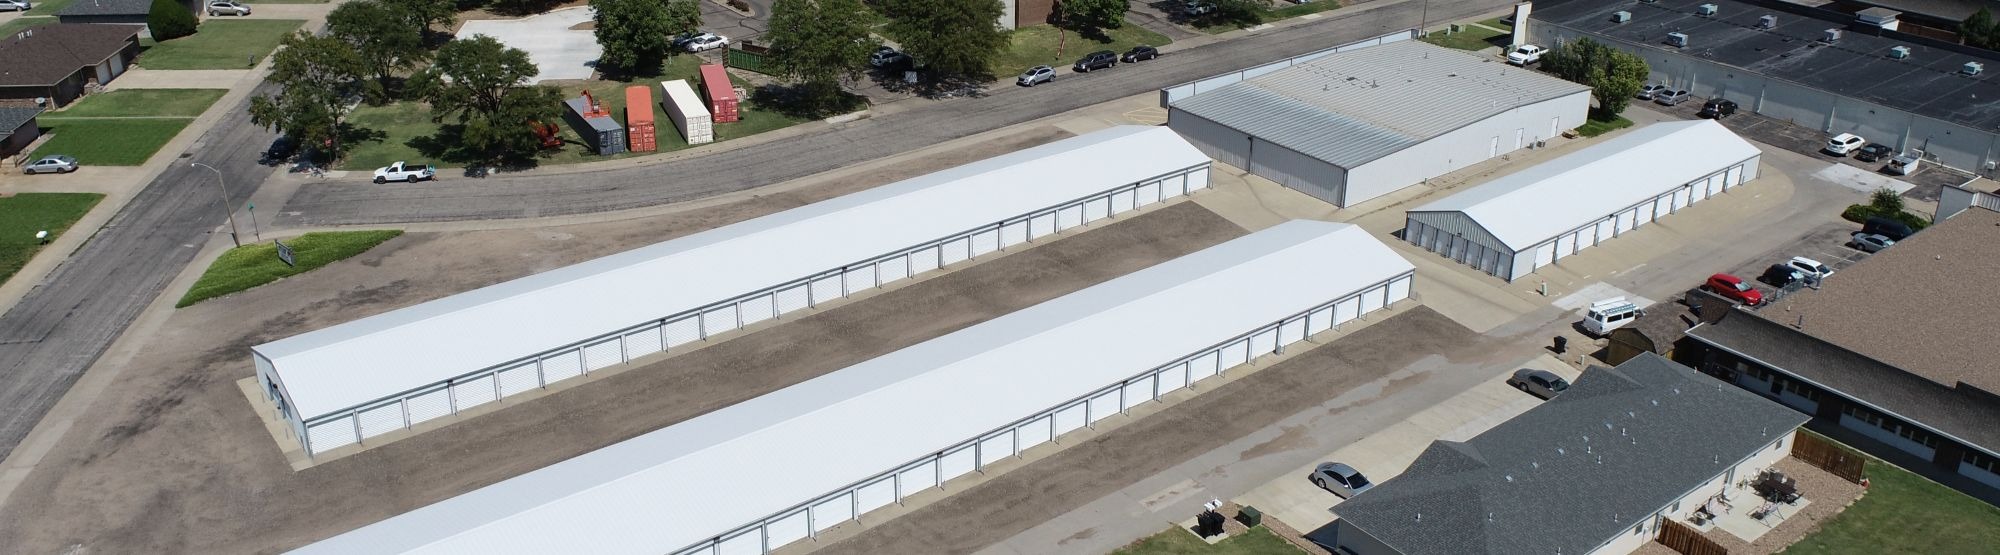 Western Self Storage units available in Hays, KS